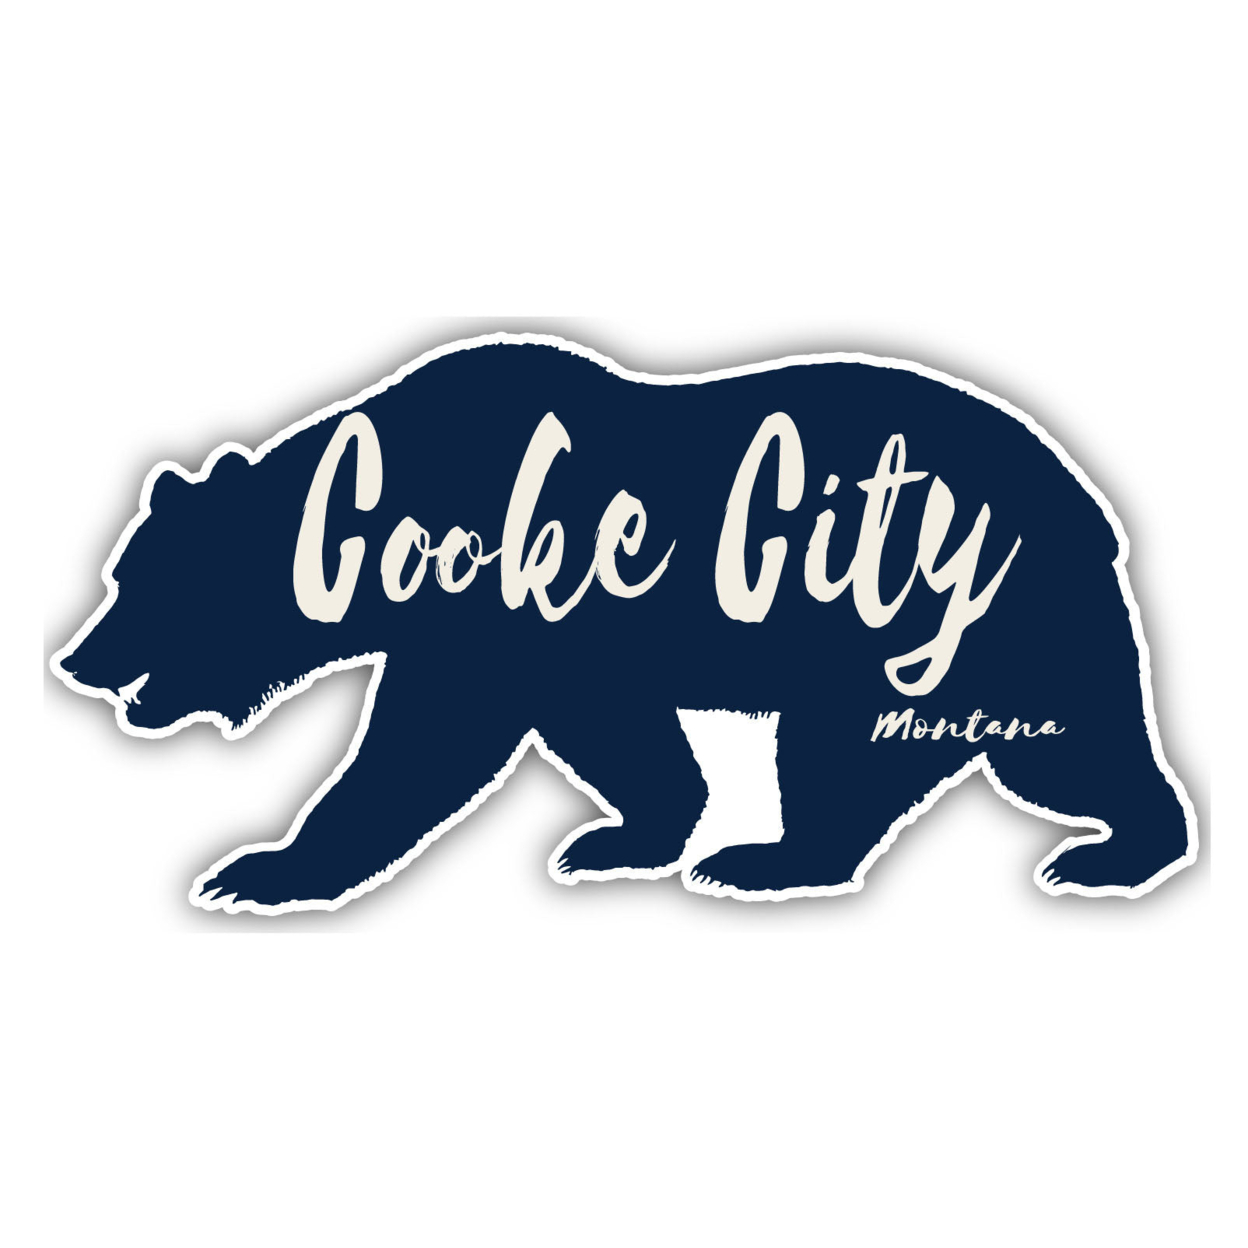 Cooke City Montana Souvenir Decorative Stickers (Choose Theme And Size) - 4-Pack, 12-Inch, Great Outdoors